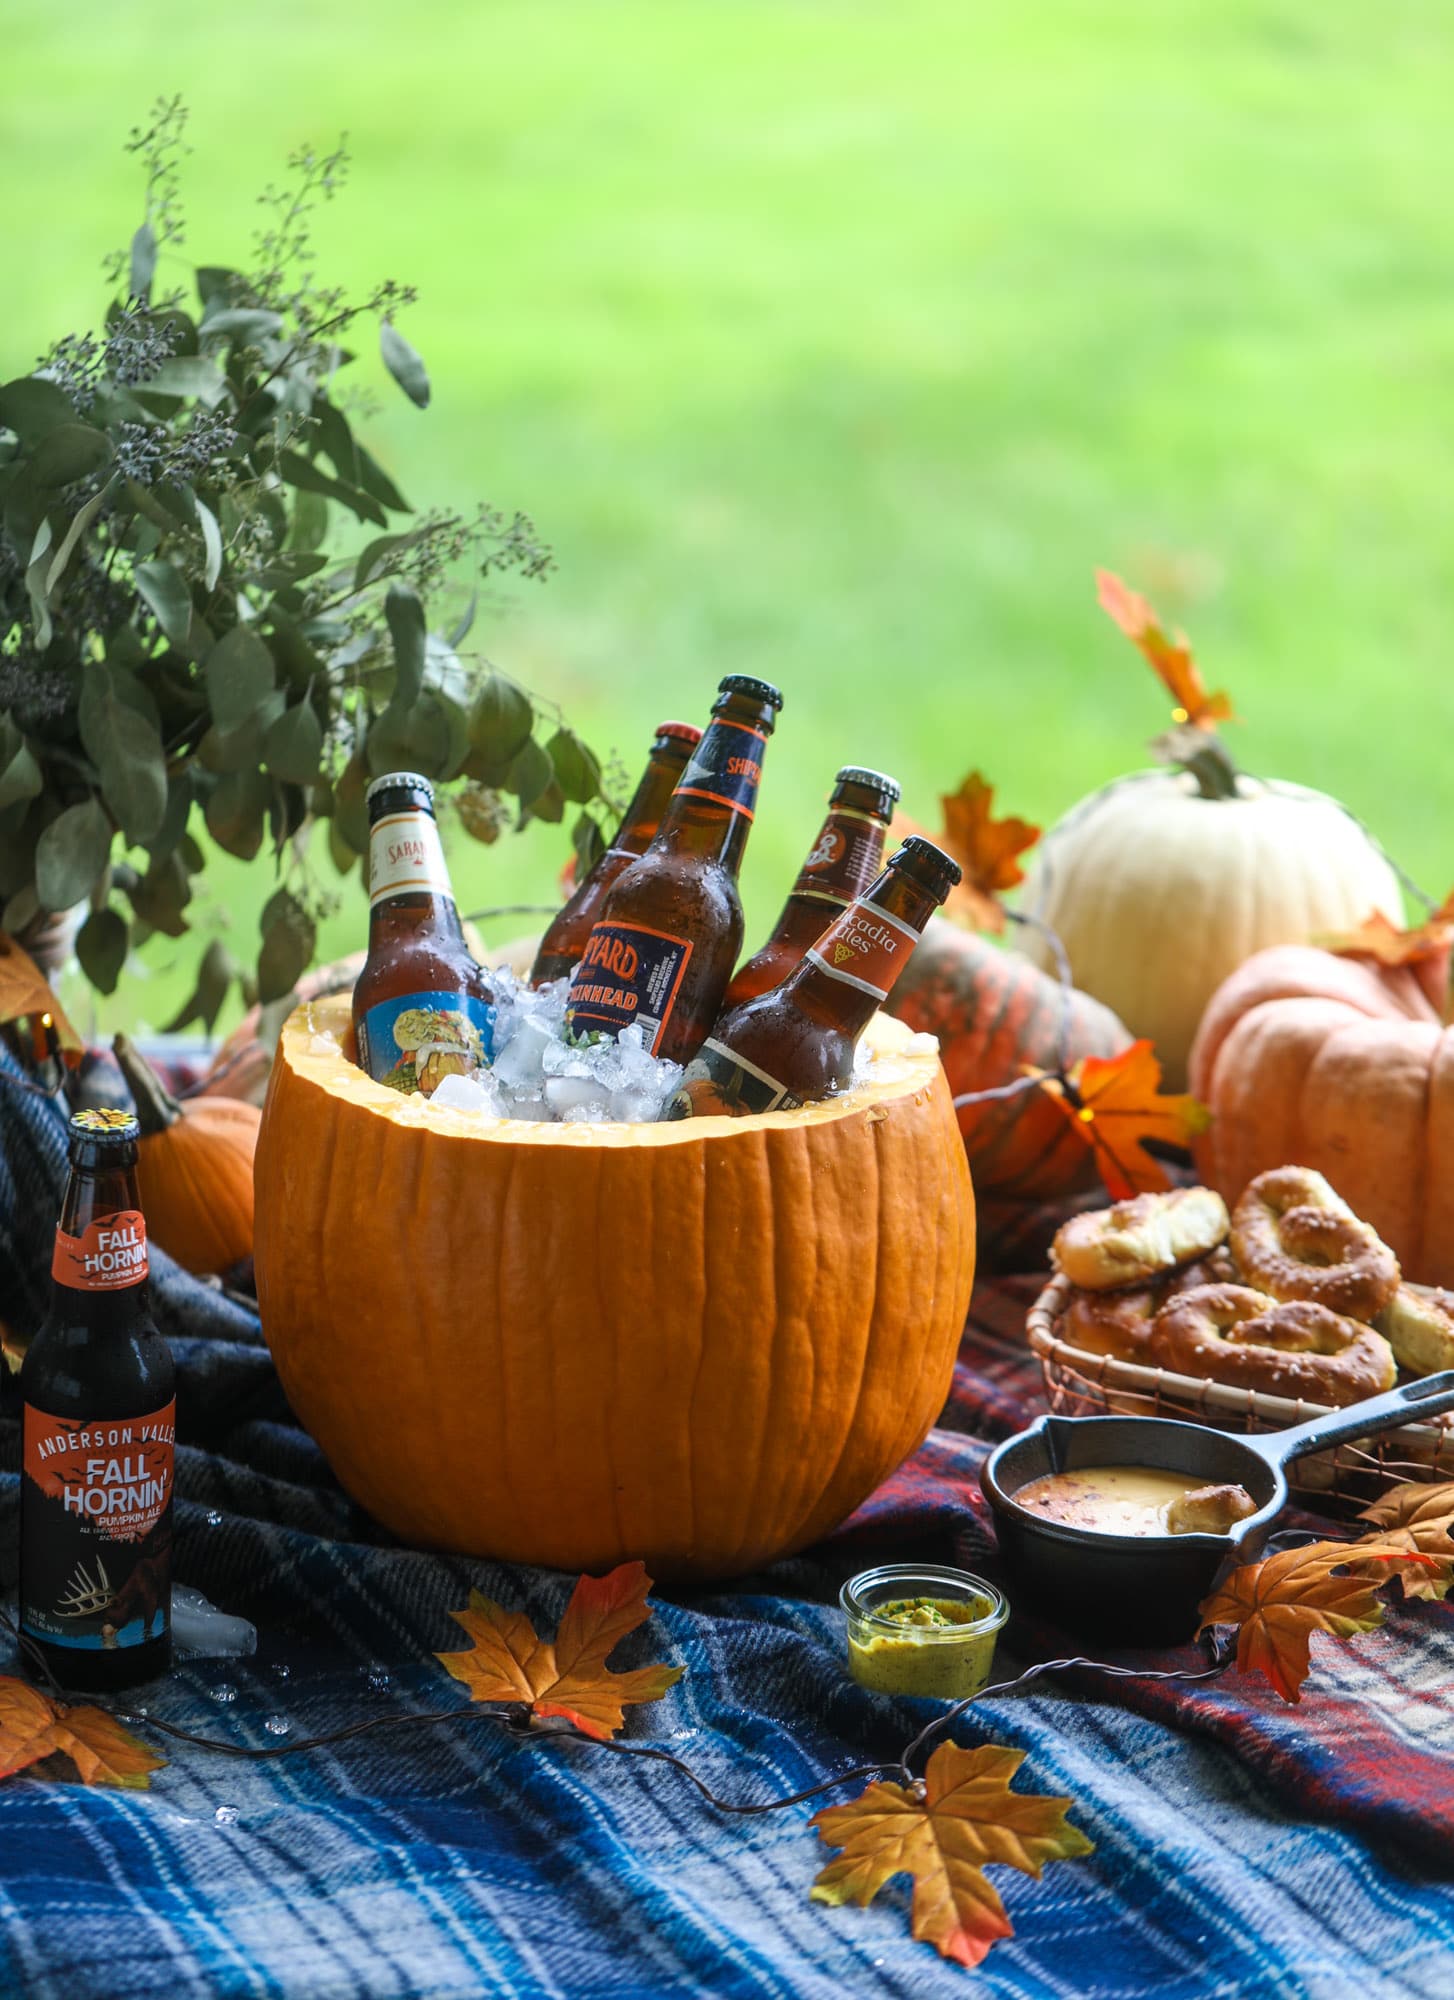 This is the cutest way ever to serve the best pumpkin beer! If you do a pumpkin beer party of a pumpkin beer tasting, this pumpkin cooler is an adorable (and easy!) way to make things festive. Kick it up with a hot pretzel bar and lots of dipping sauce too! I howsweeteats.com #pumpkin #beer #cooler #softpretzel #fall #cheese